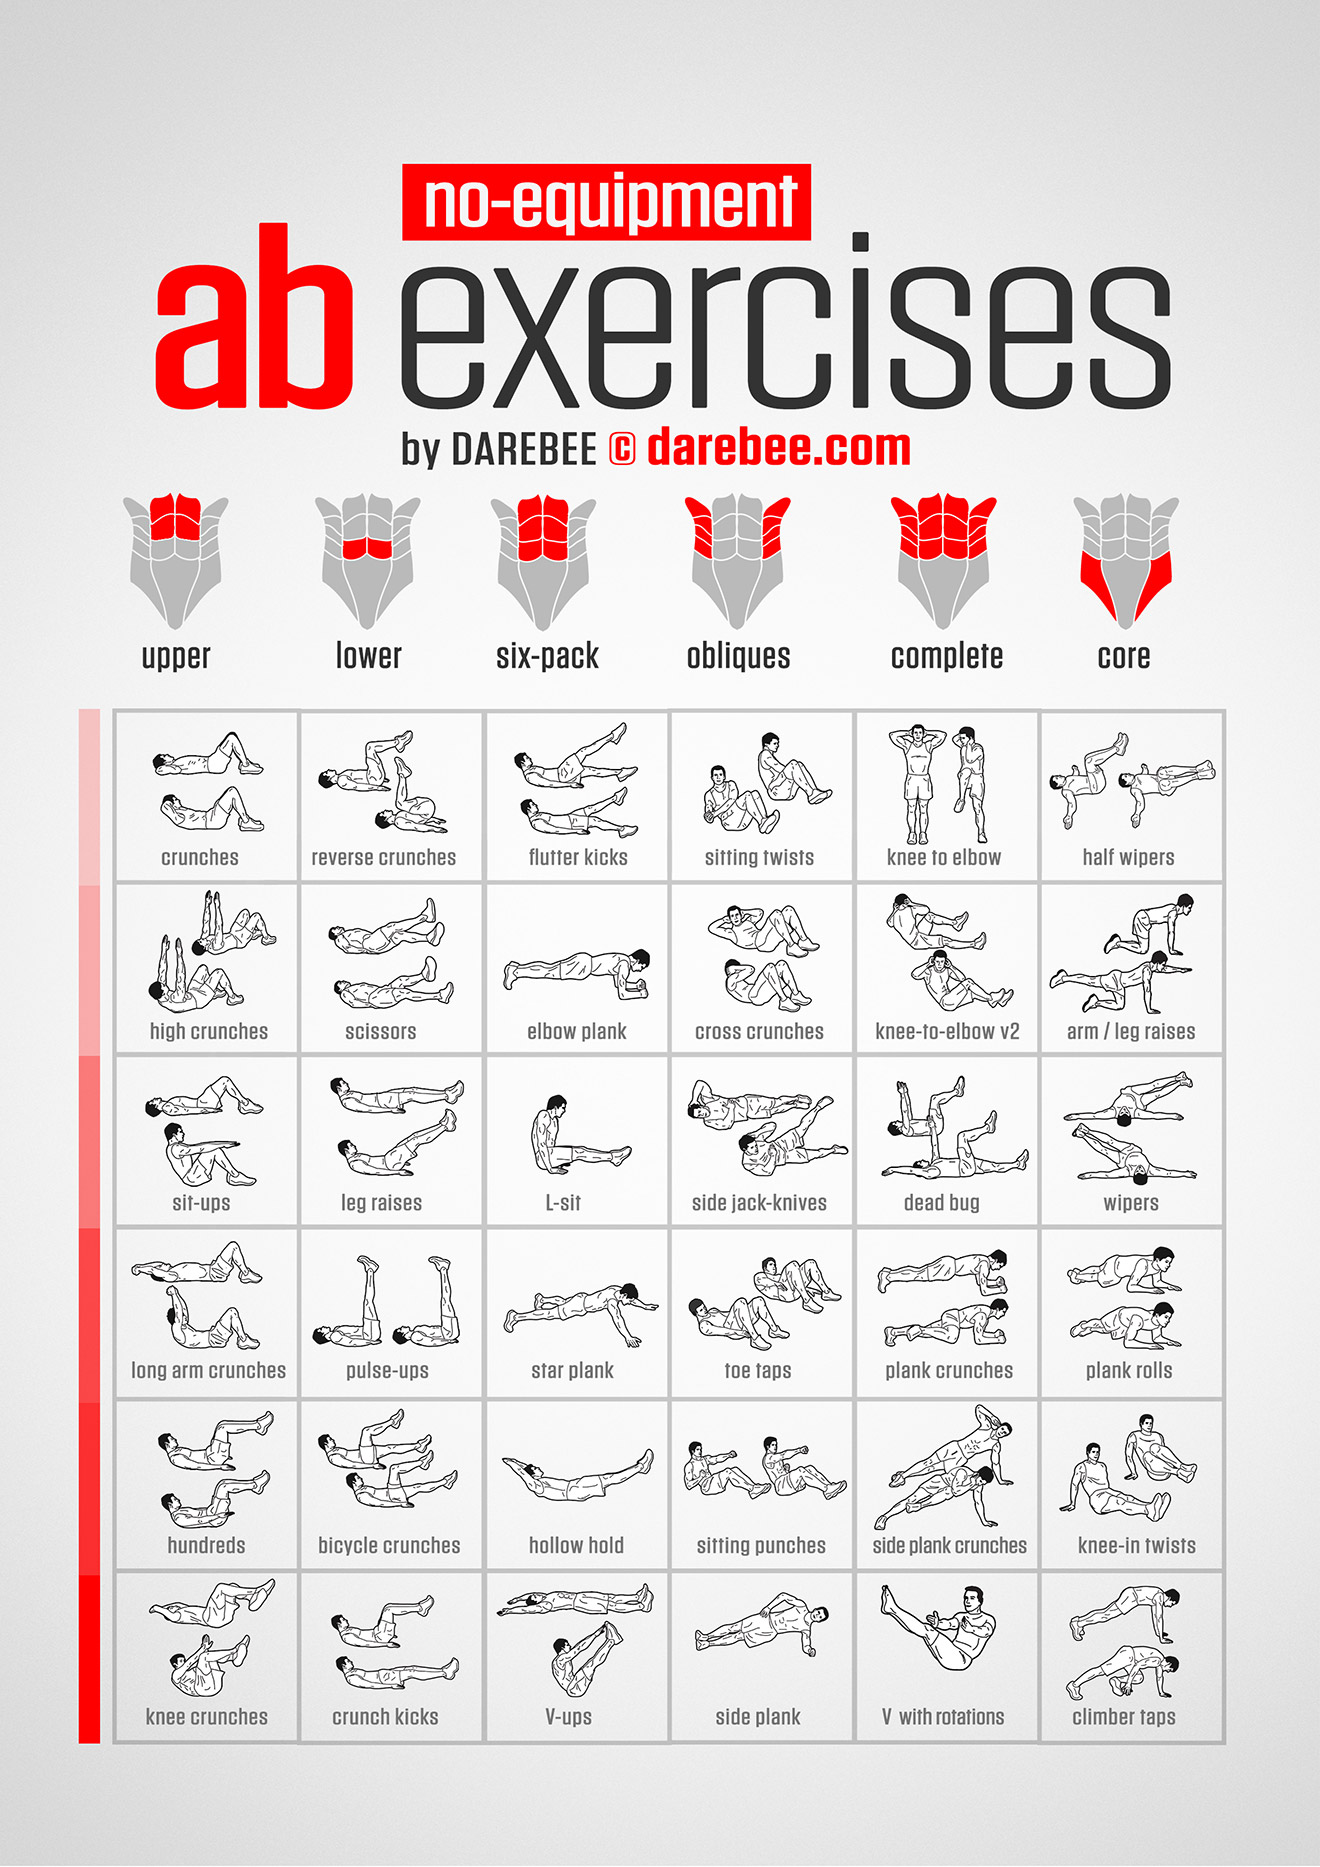 Back Exercises and Abdominal Exercise Recommendations